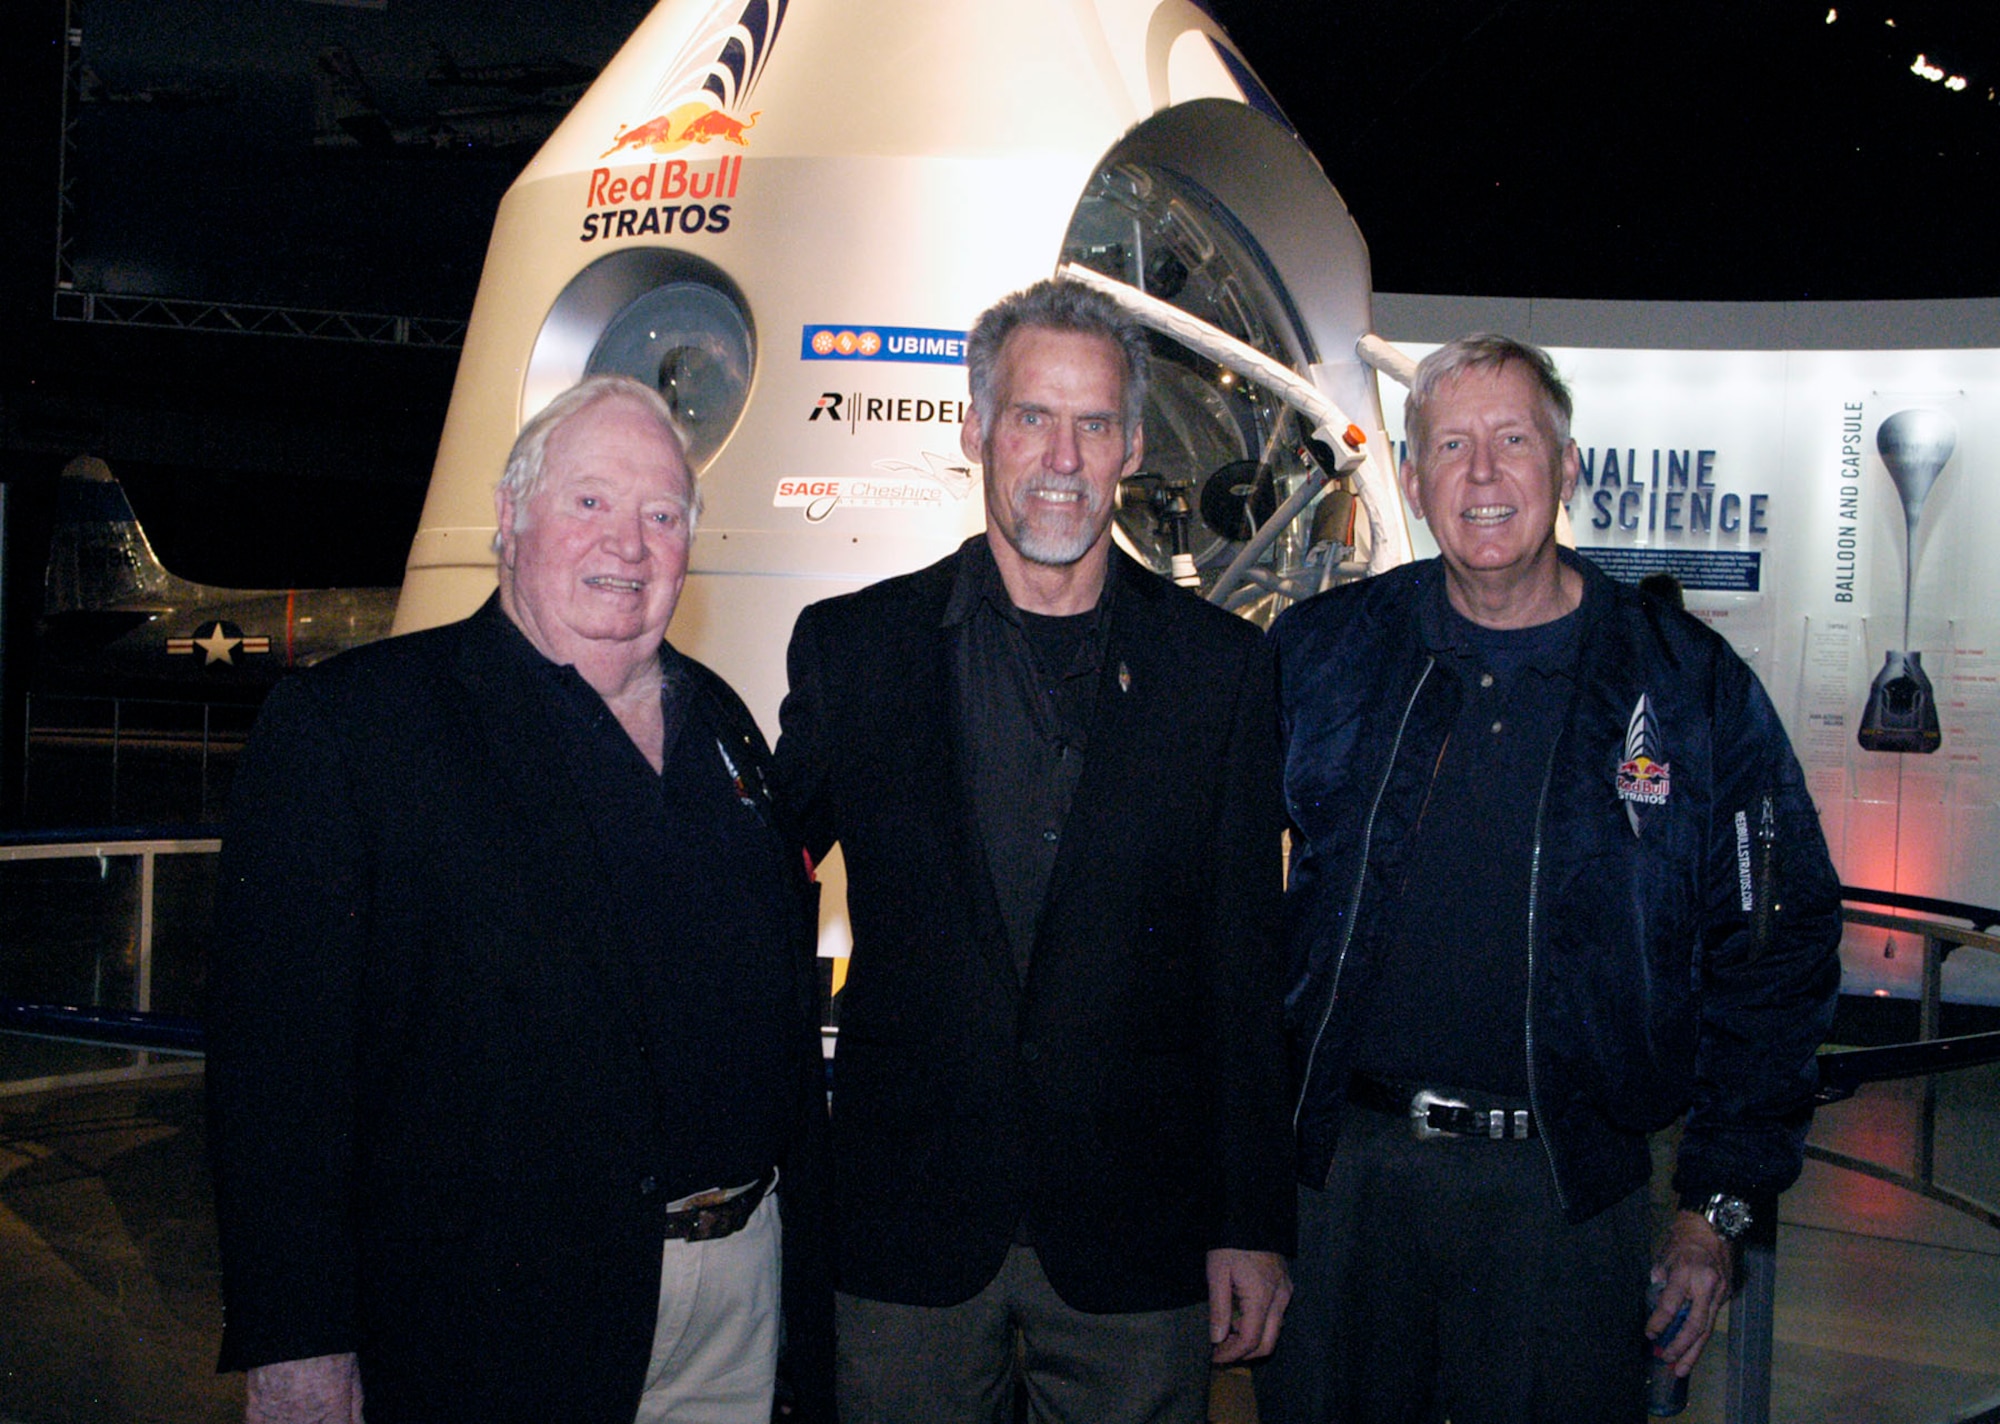 The Red Bull Stratos exhibit will be on display at the National Museum of the U.S. Air Force from Jan. 24-March 16, 2014. (left to right) Col. (Ret.) Joe Kittinger, director of flight operations and safety for the Red Bull Stratos mission, Art Thompson, technical project director, and Dr. Jonathan Clark, medical director, were at the museum for the grand opening on Jan. 23. (U.S. Air Force photo)